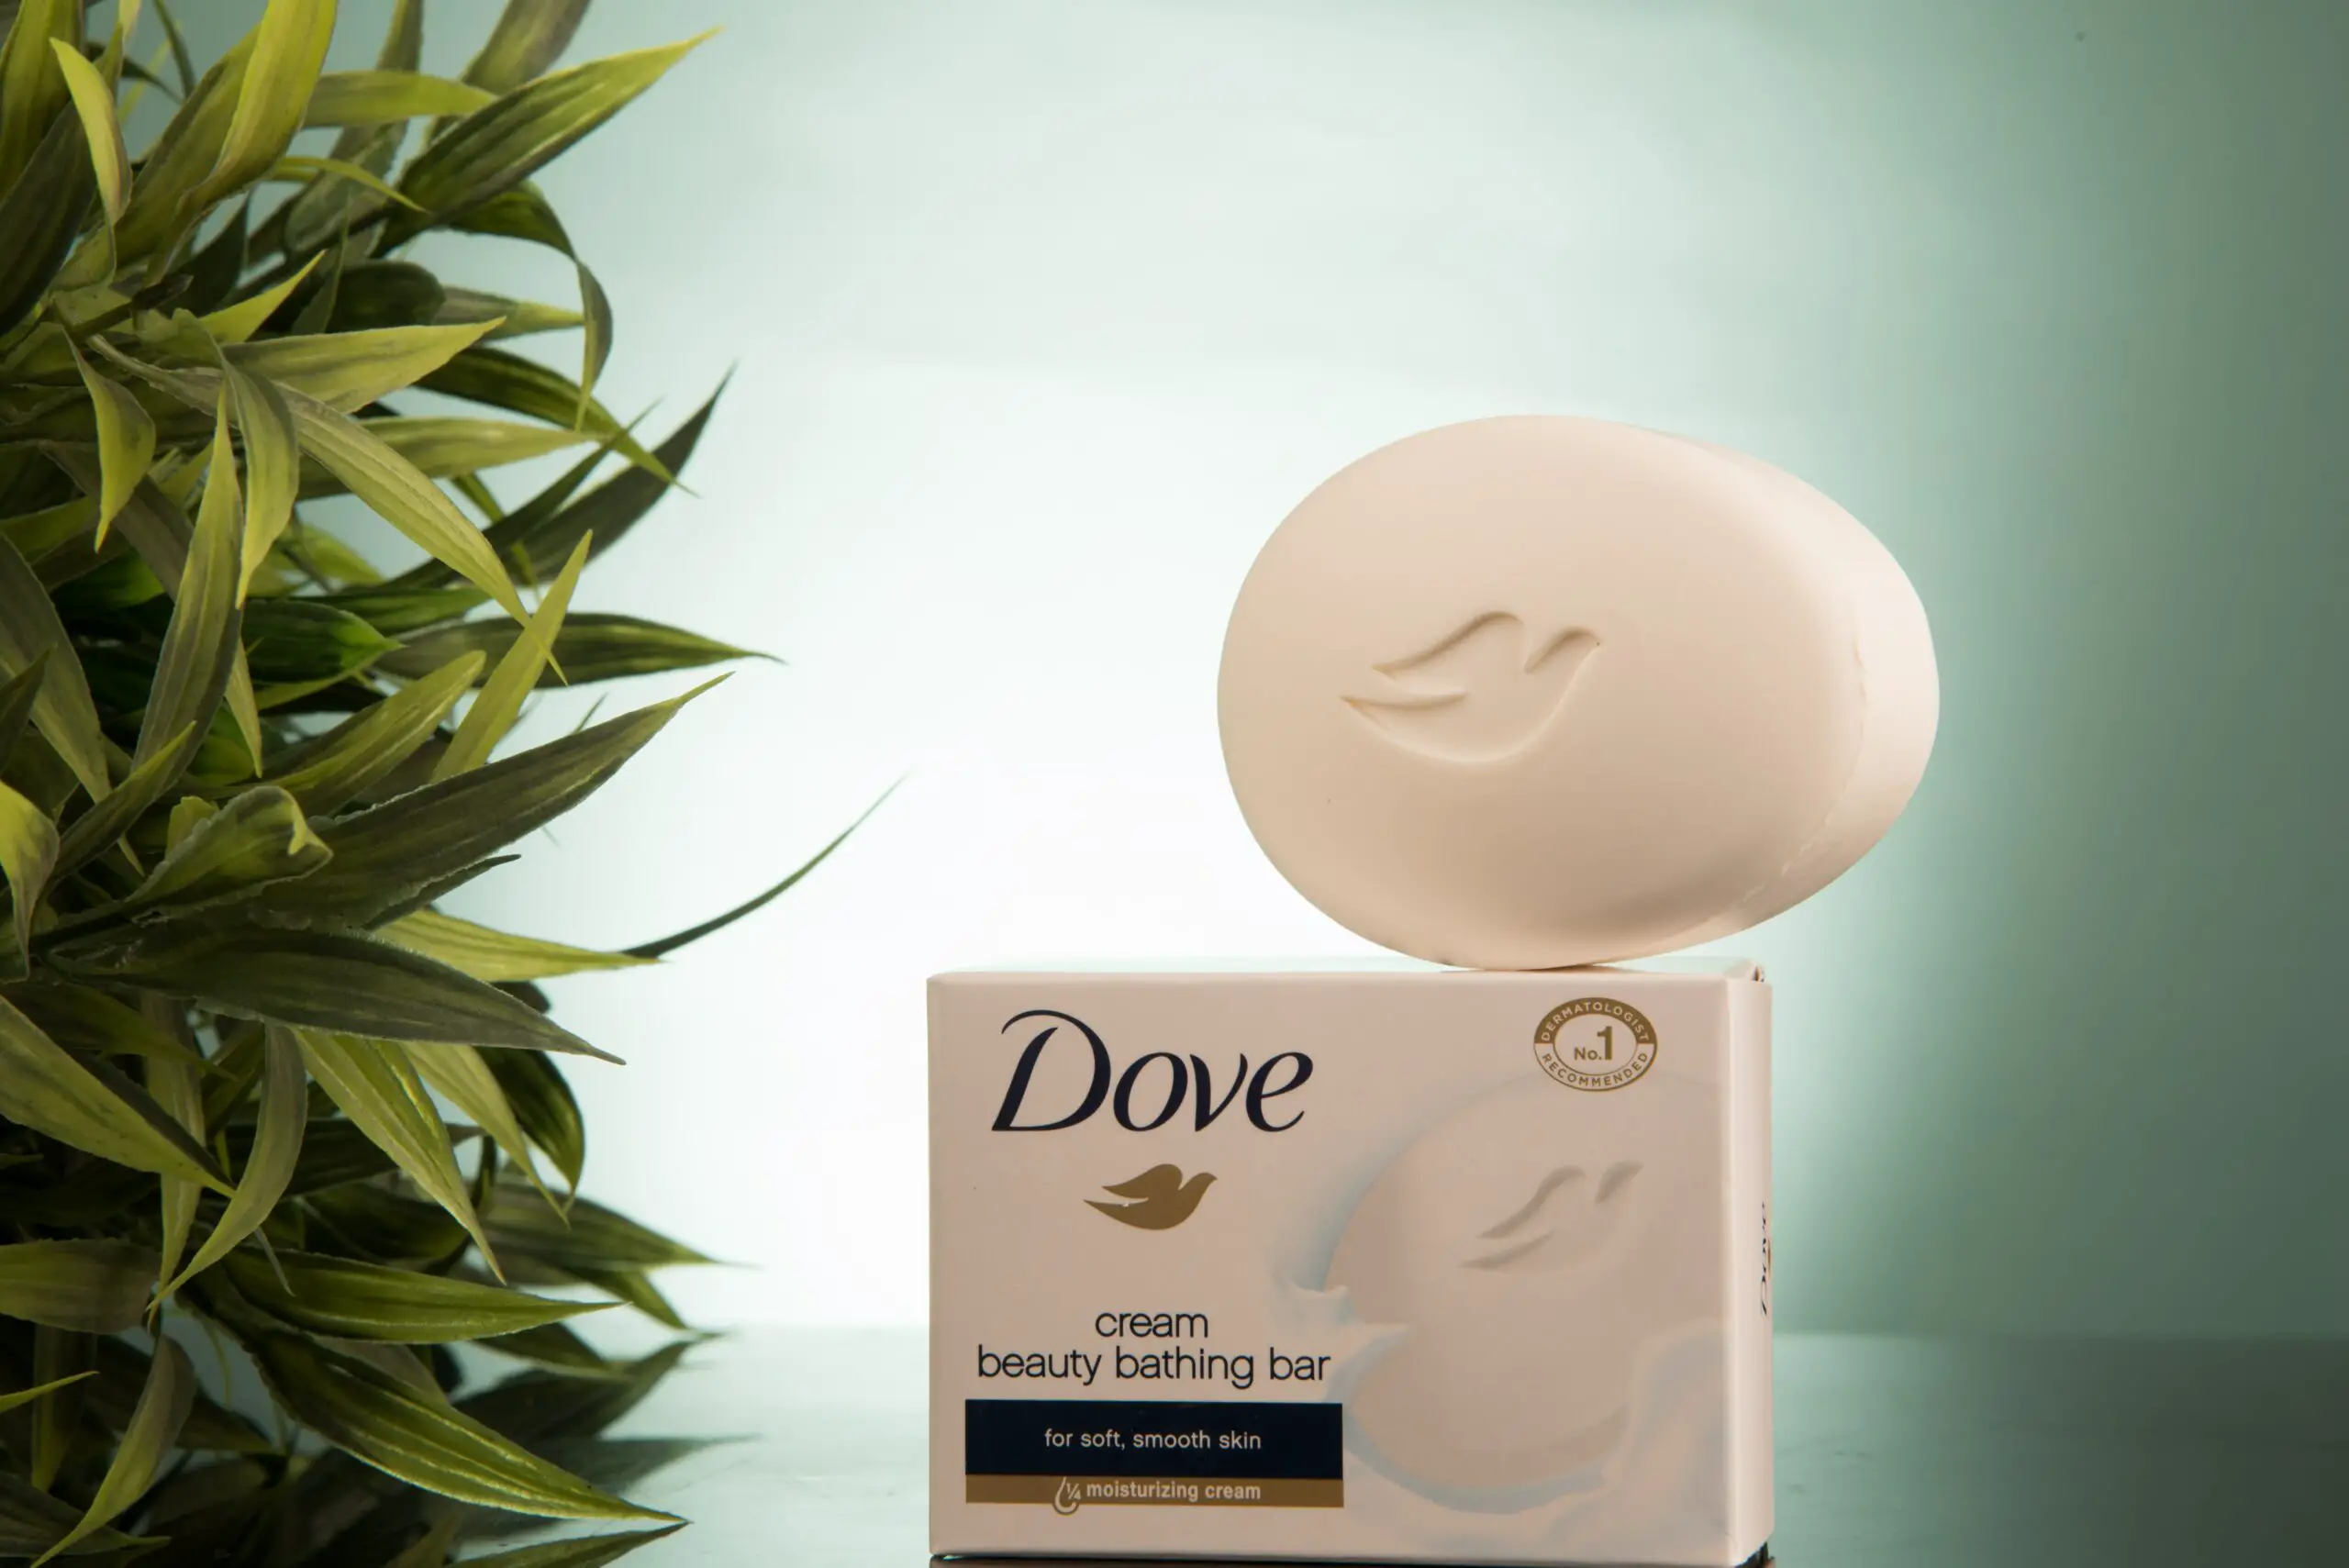 Is Dove a Toxic Soap?